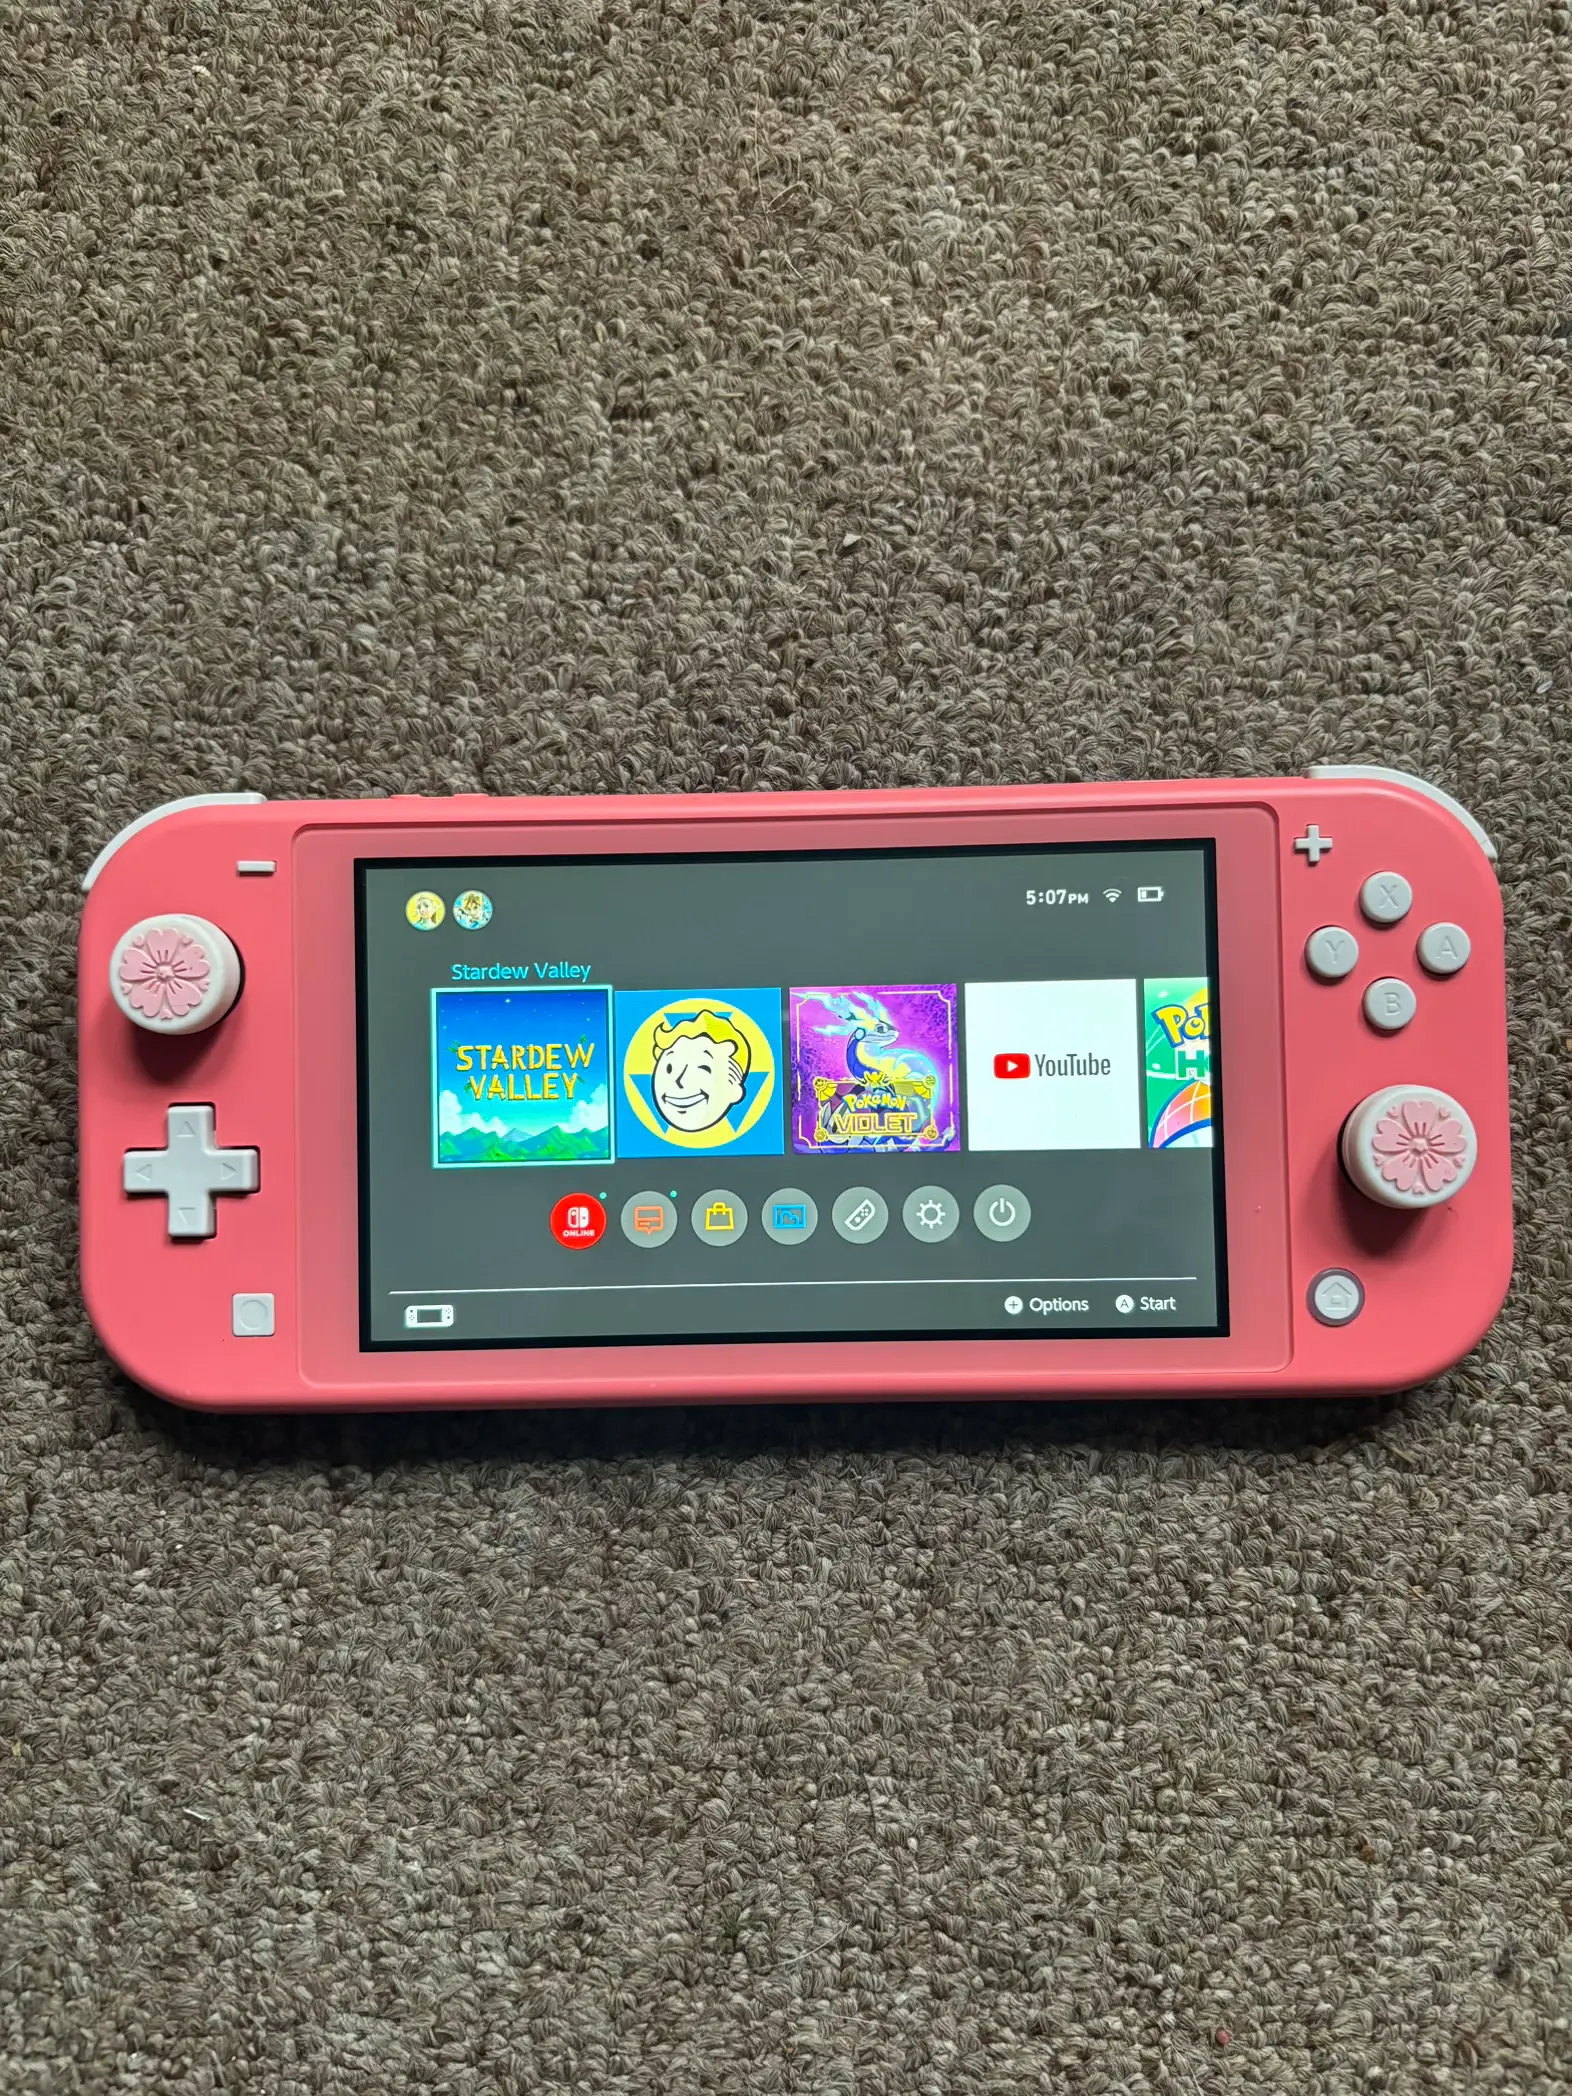 How to get free games on the Nintendo Switch!, Gallery posted by Kaliyah